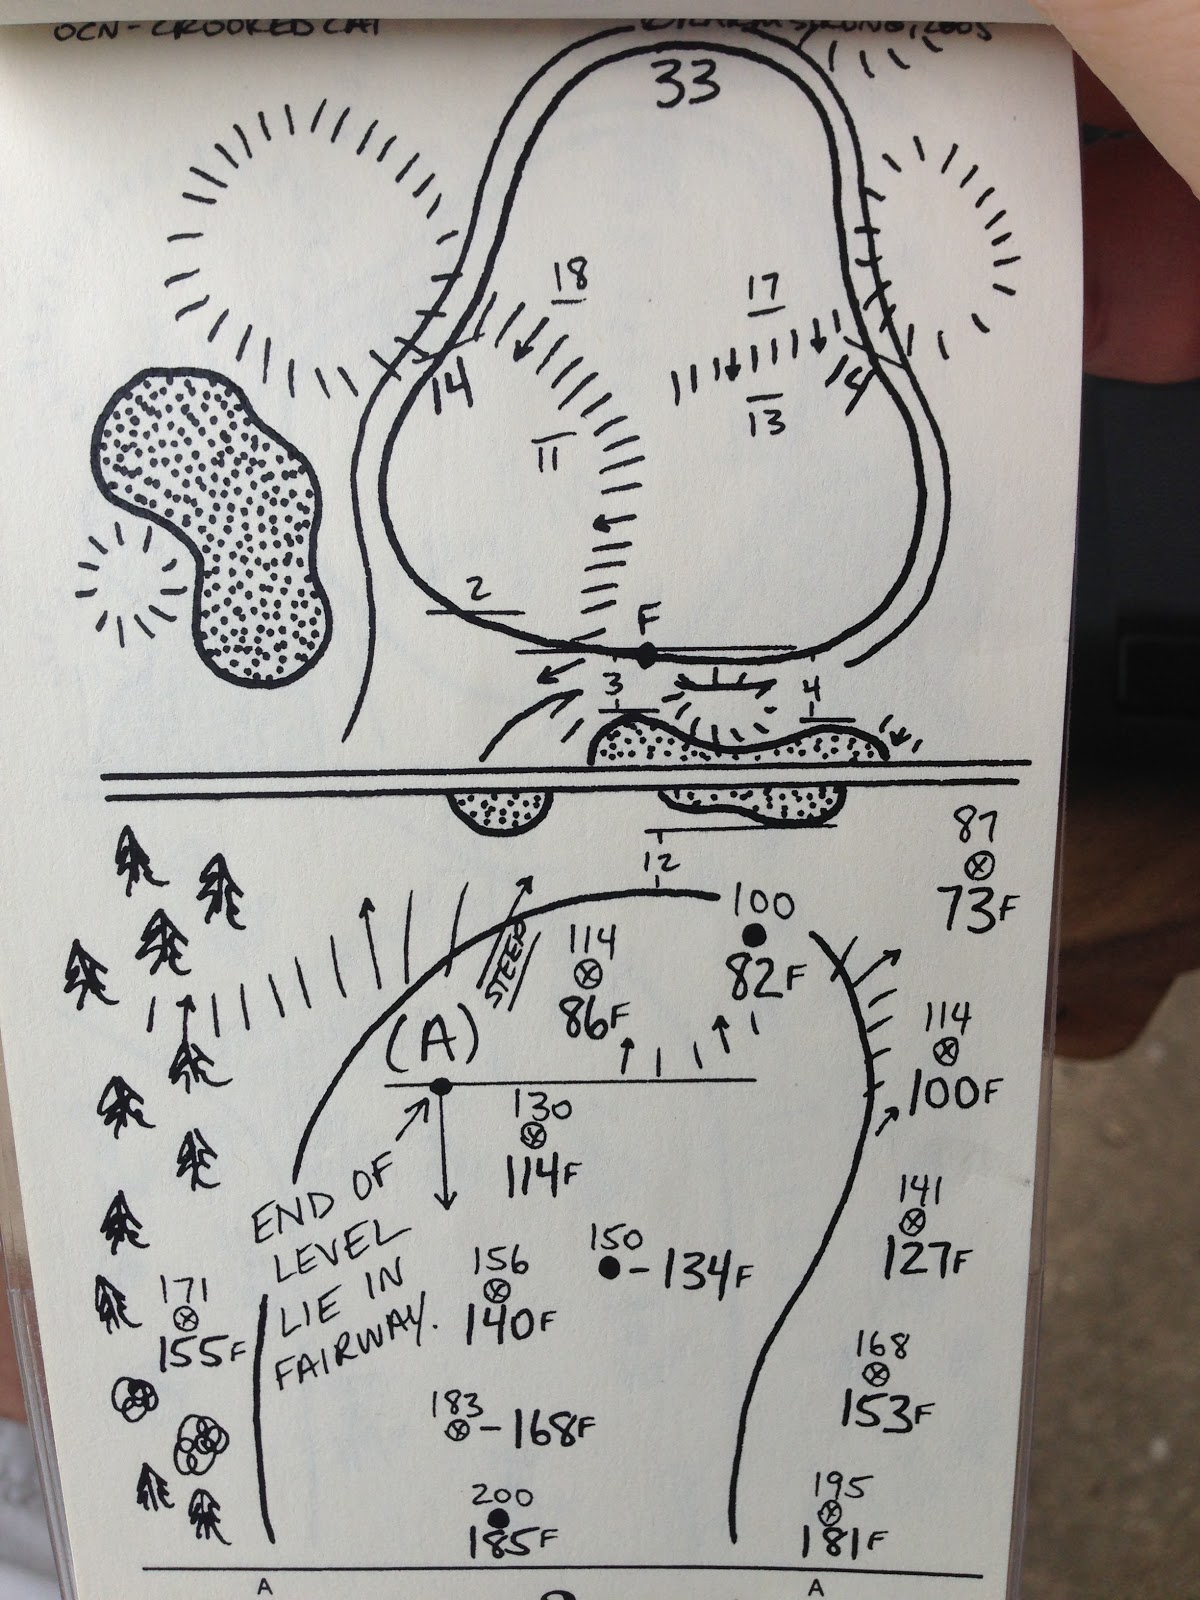 My Journey on the Golf Channel AmTour: Pro Yardage Book